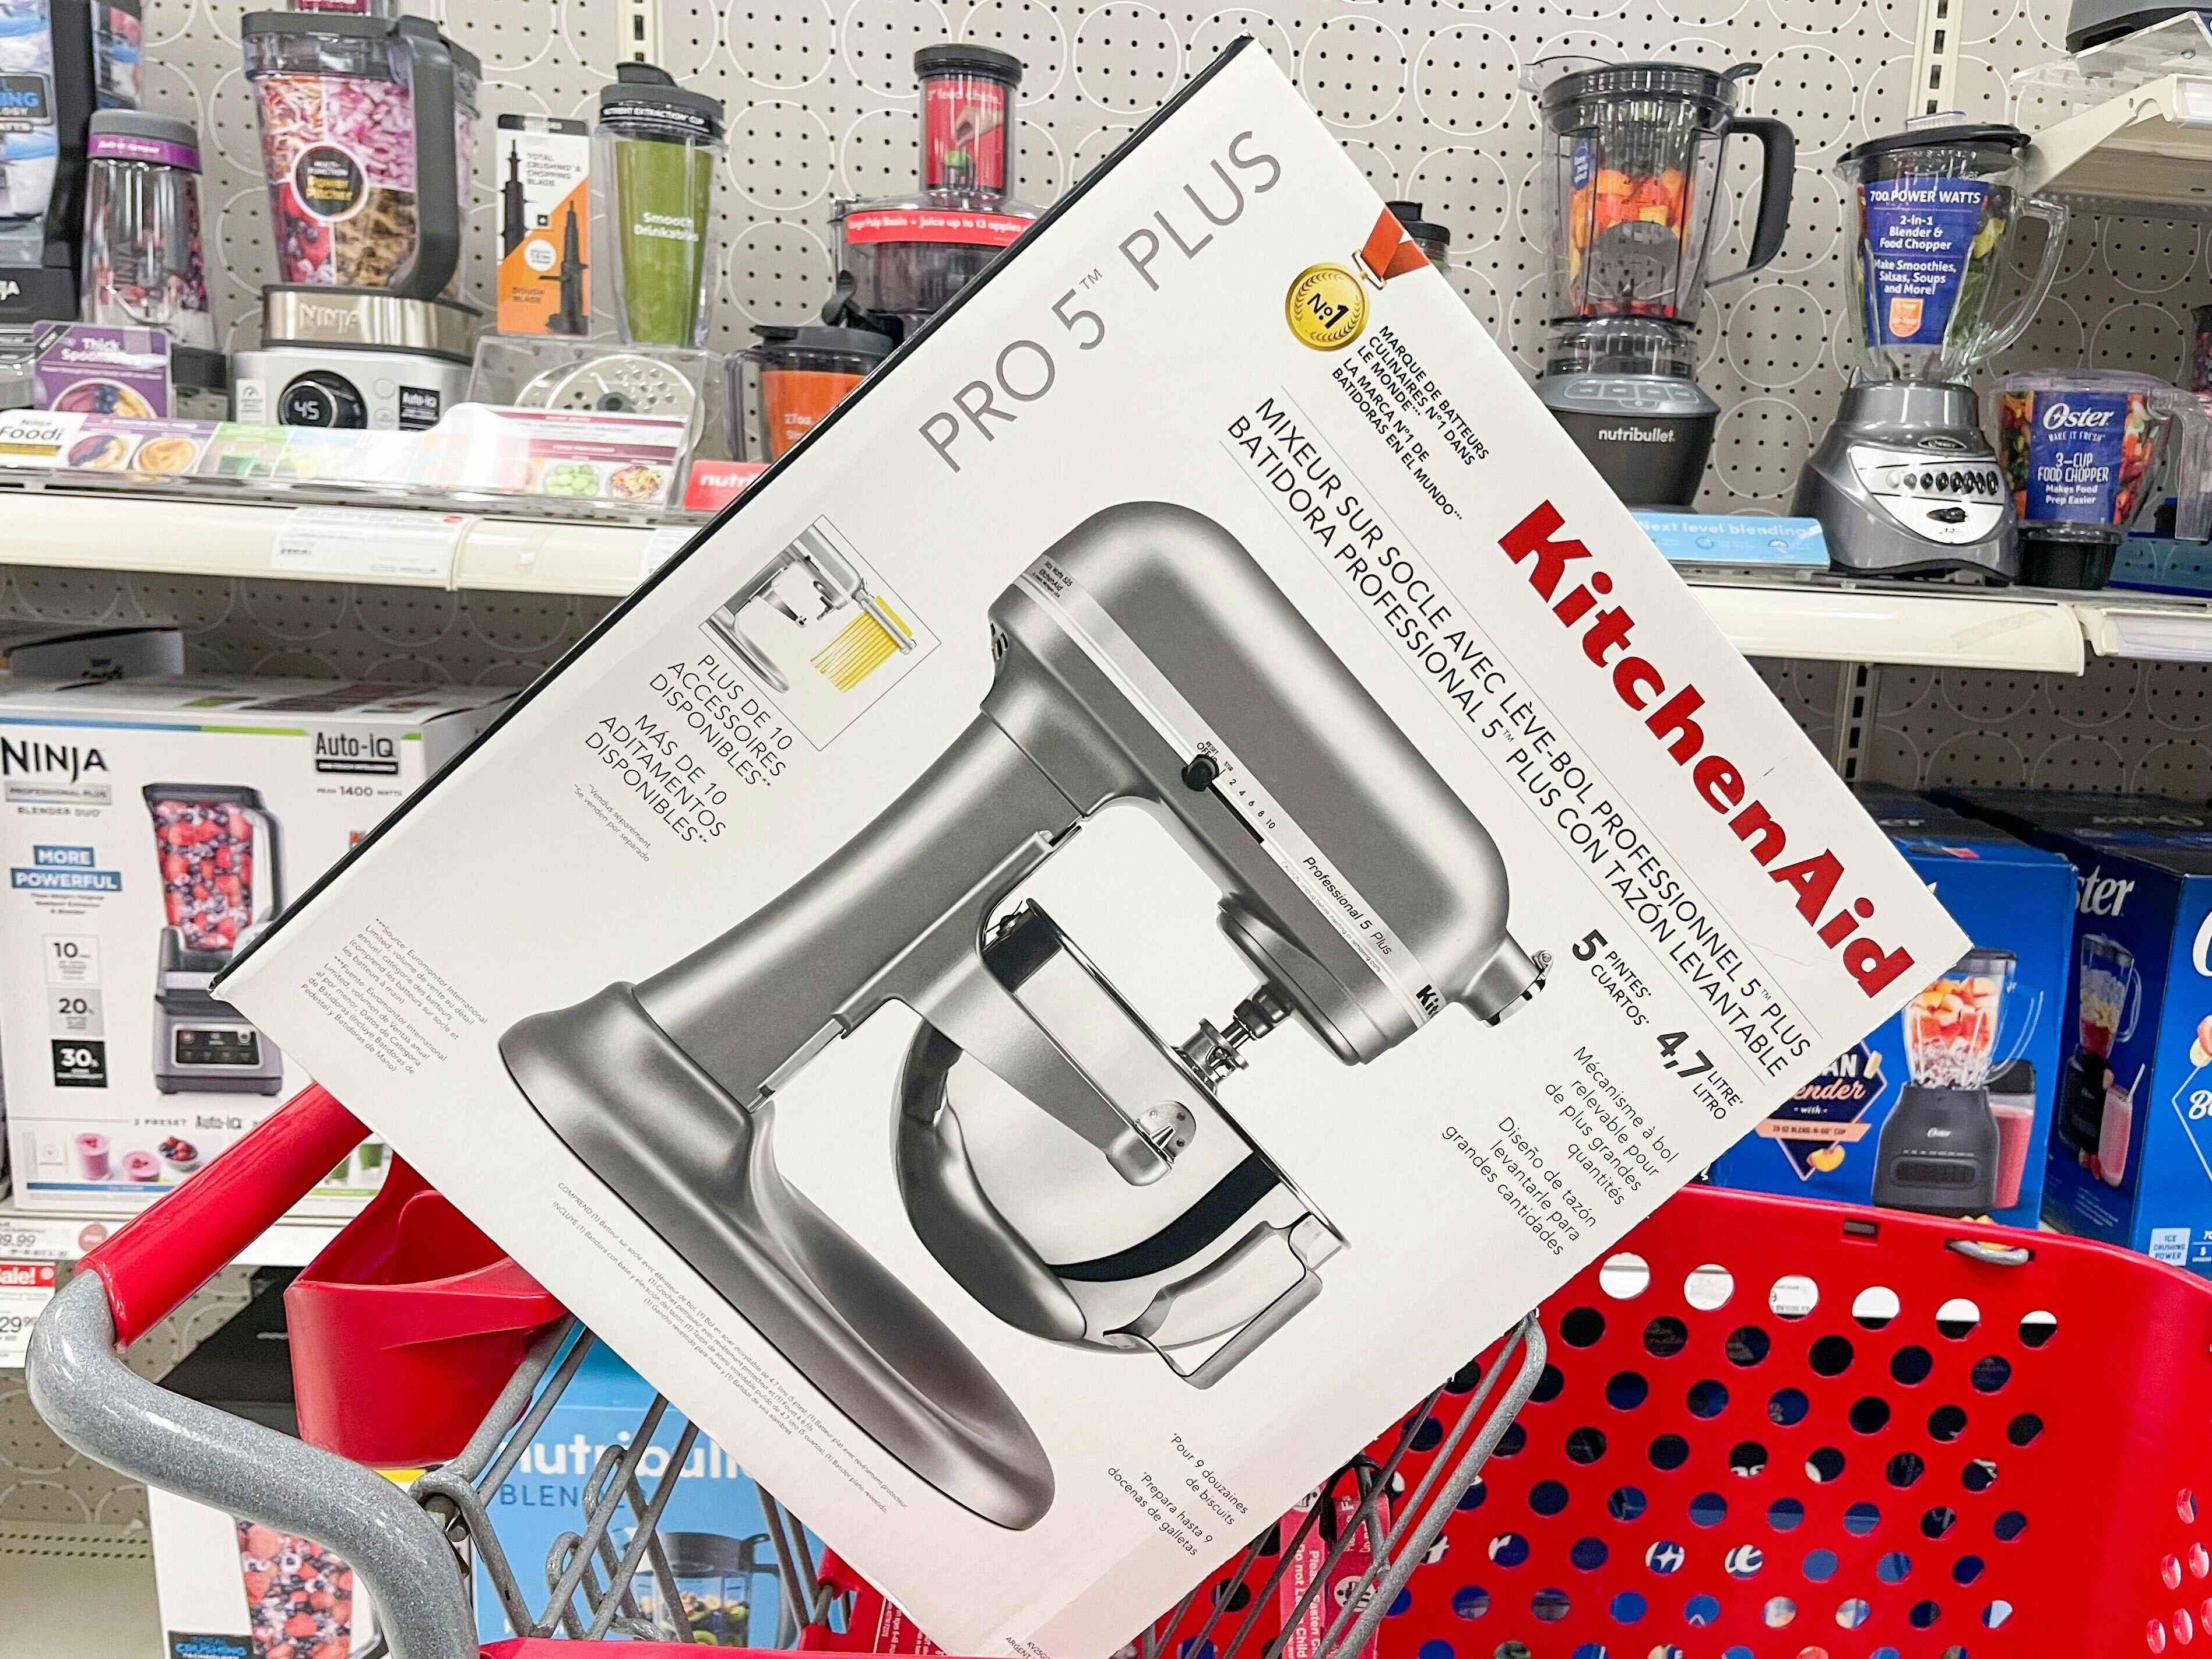 Sam's Club Has KitchenAid Mixers For Up To $60 Off Right Now